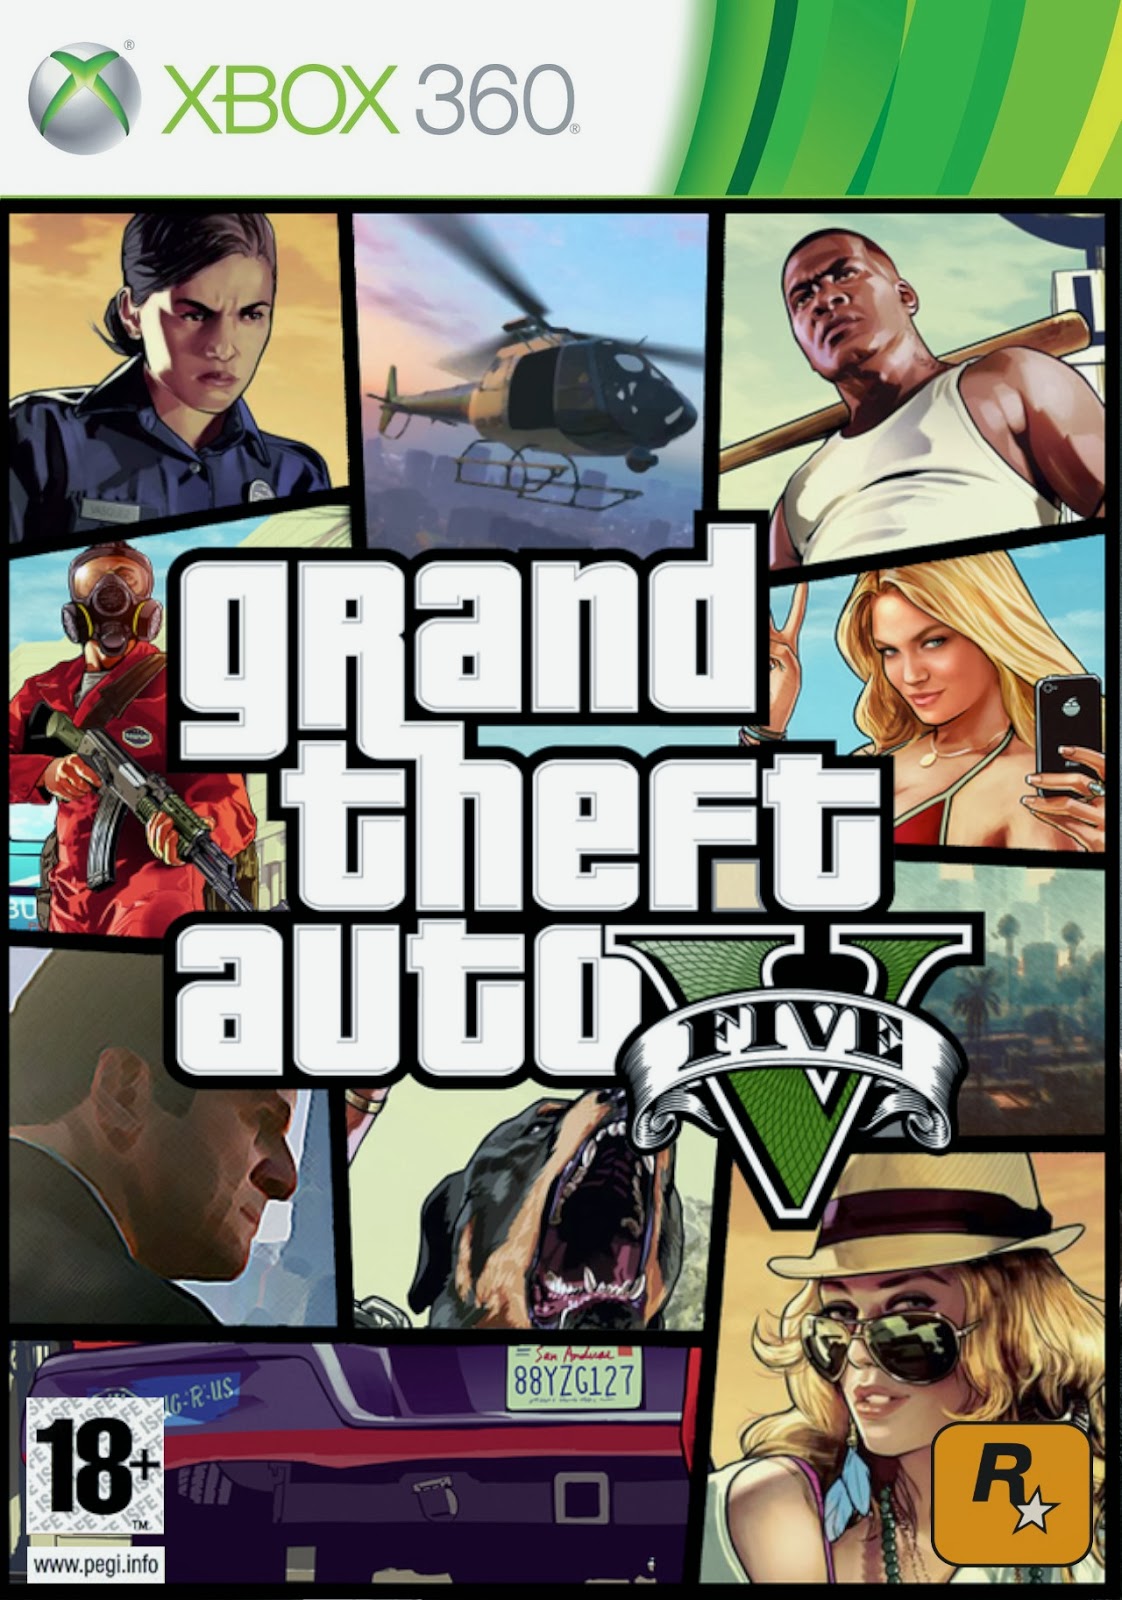 buy-xbox-360-113-grand-theft-auto-v-gta-5-cheap-choose-from-different-sellers-with-different